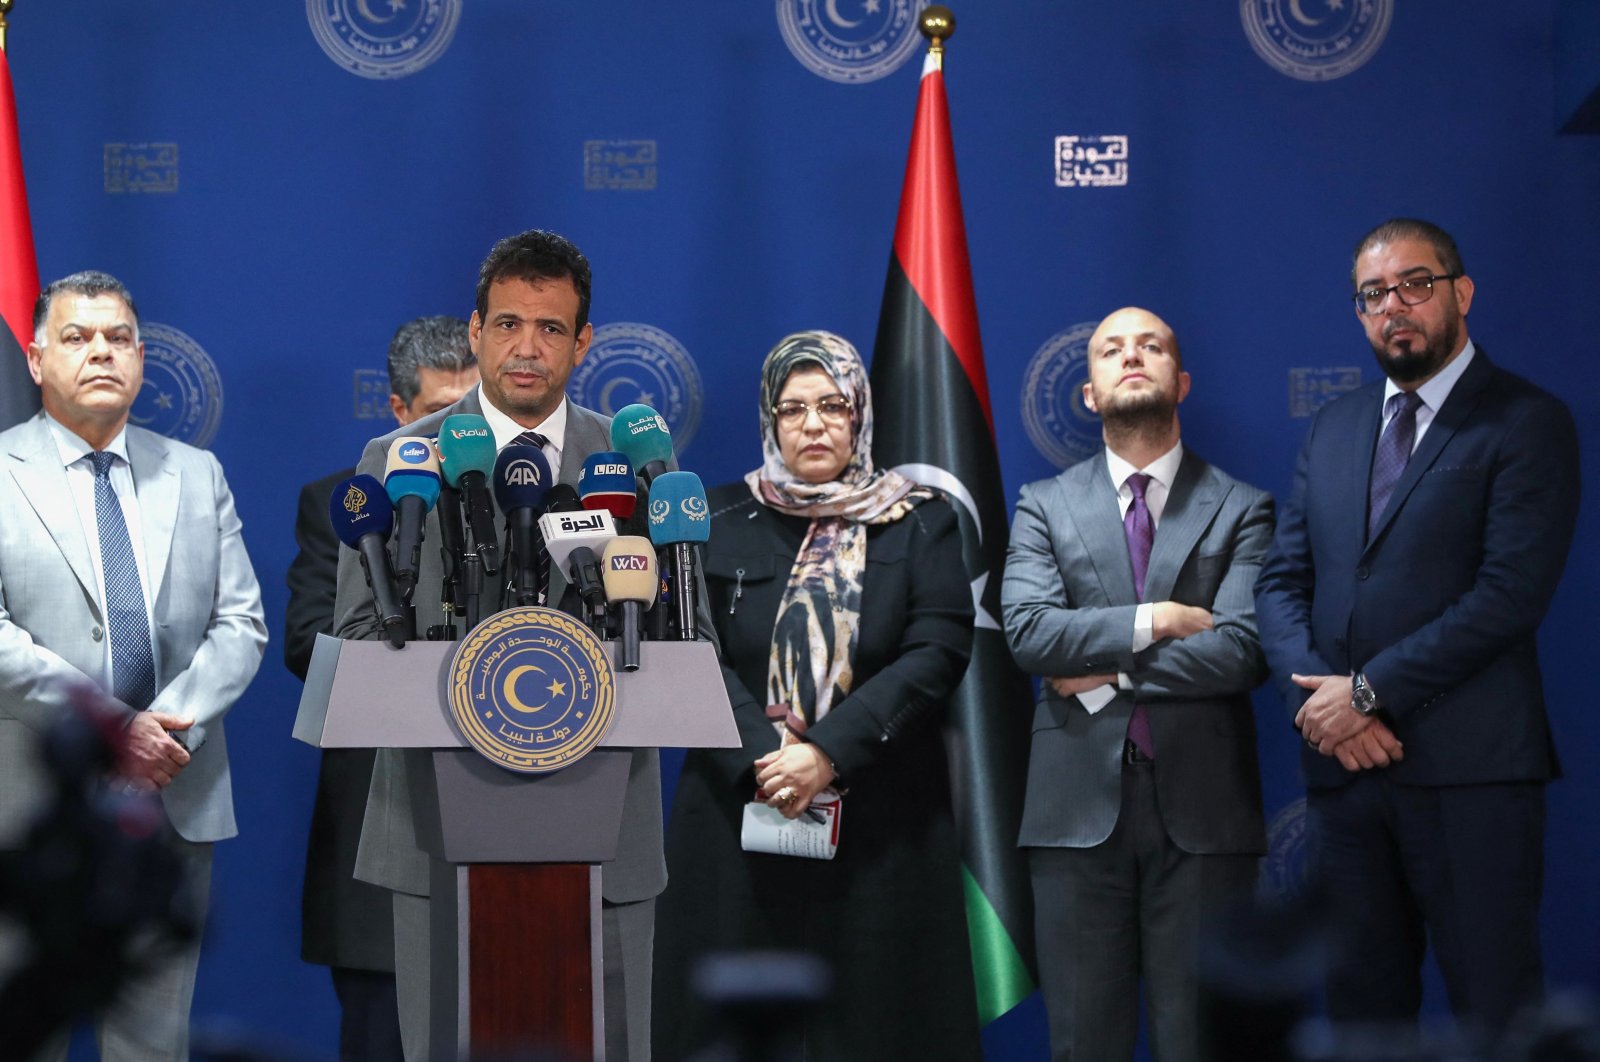 Interim head of Libya&#039;s government Ramadan Abu Jnah speaks during a press conference on the upcoming Dec. 24 elections, Tripoli, Libya, Dec. 12, 2021. (AFP Photo)